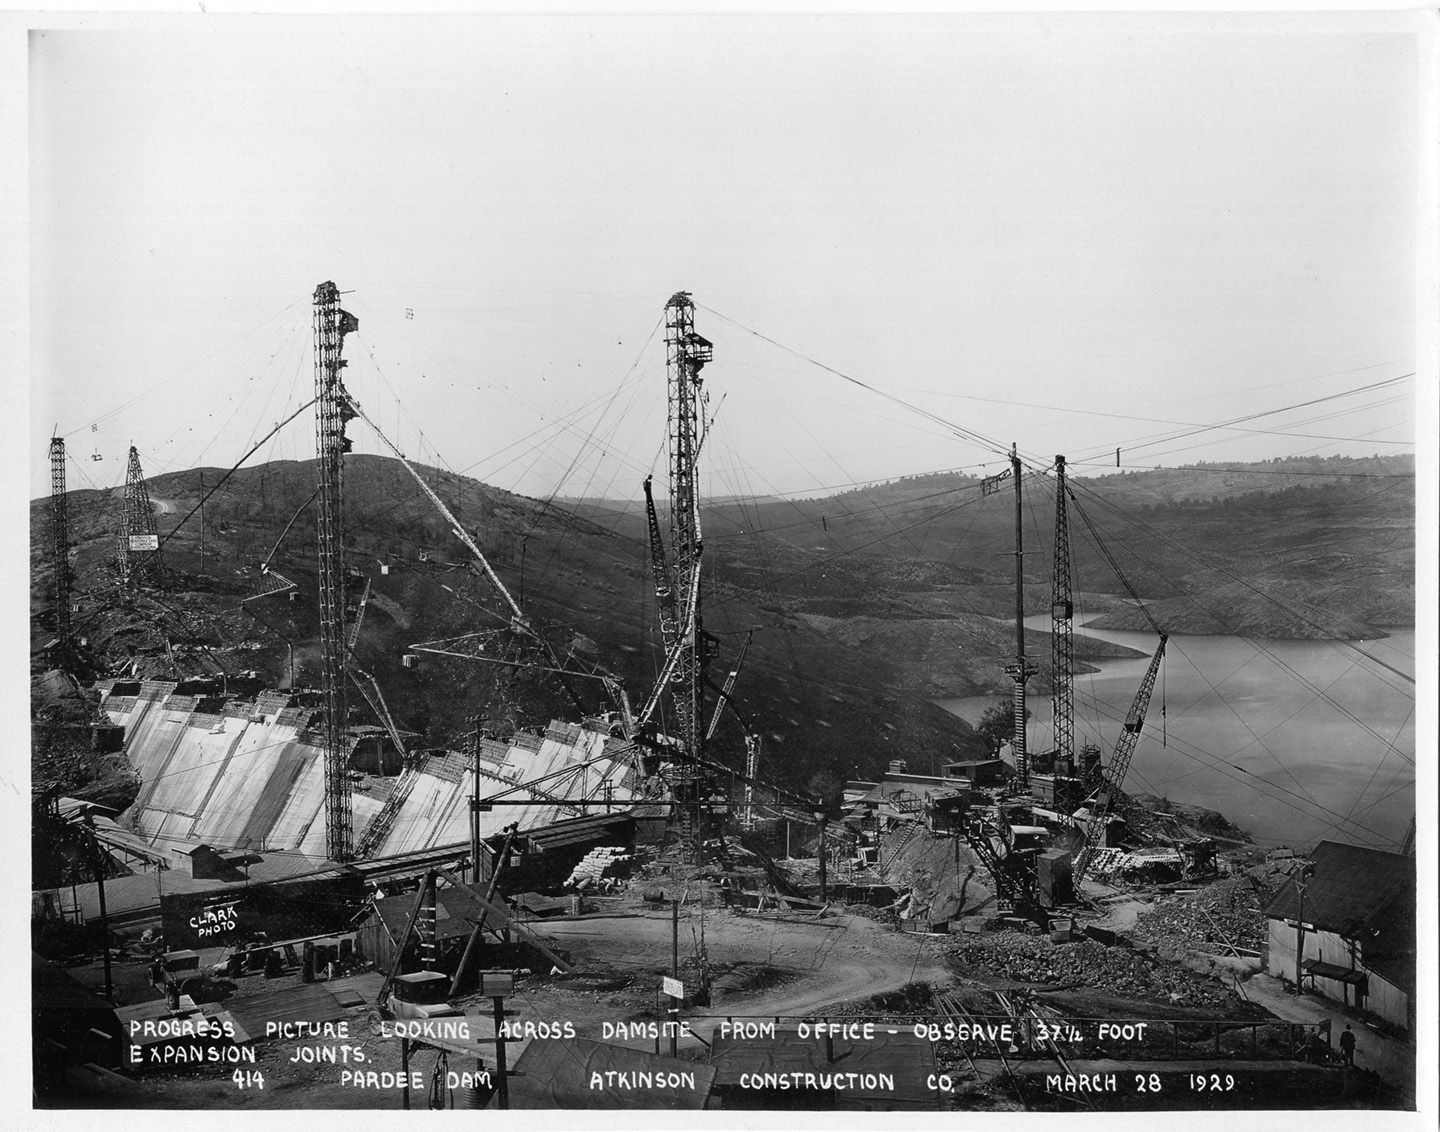 Progress picture looking across dam site from office - observe 37 1/2 foot expansion joints. (March 1929)